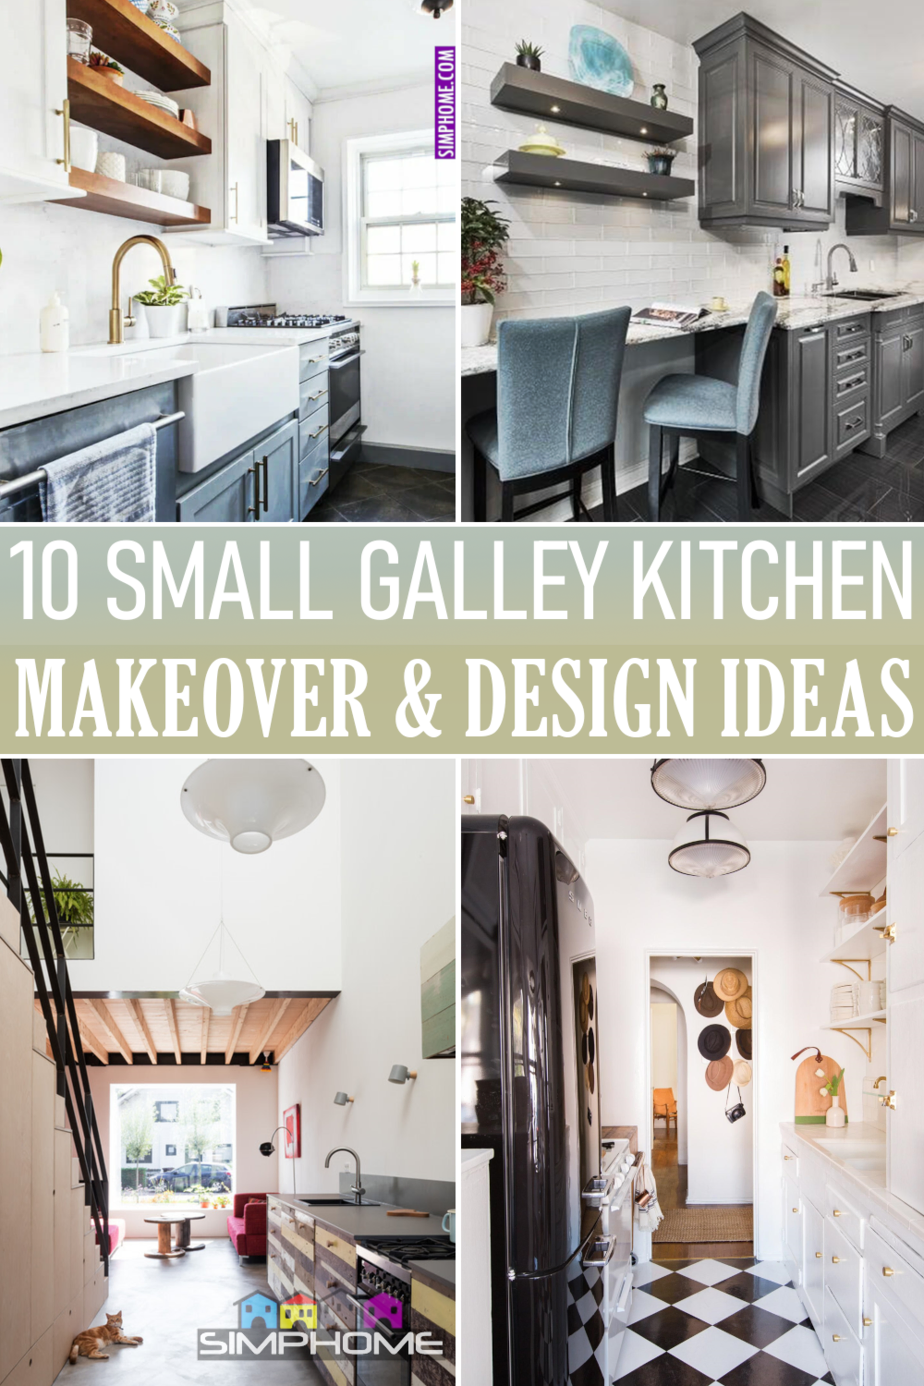 Small Galley Kitchen Makeover via Simphome.comFeatured